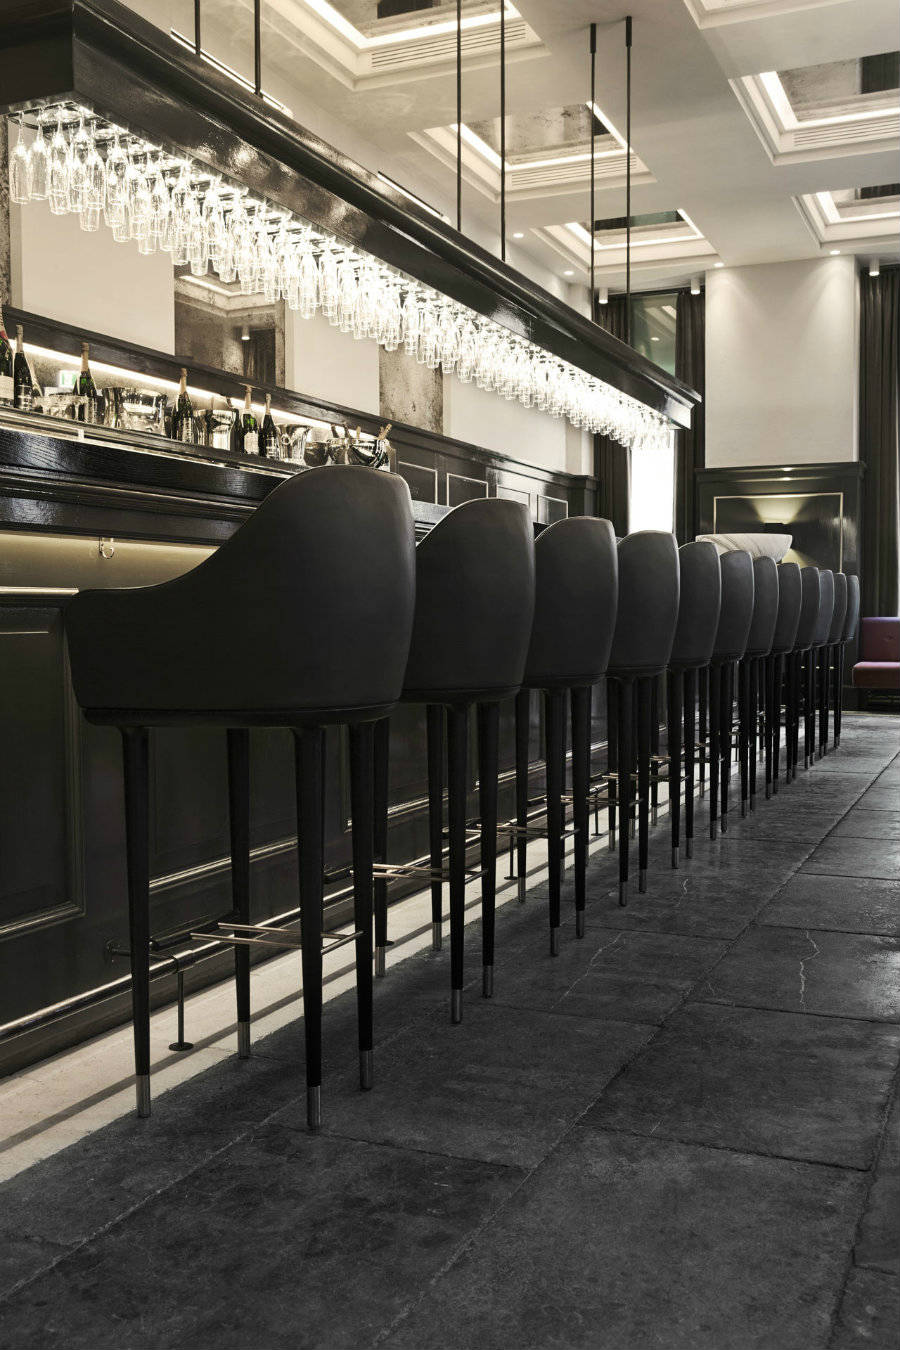 Black bar stools for lounge seating area